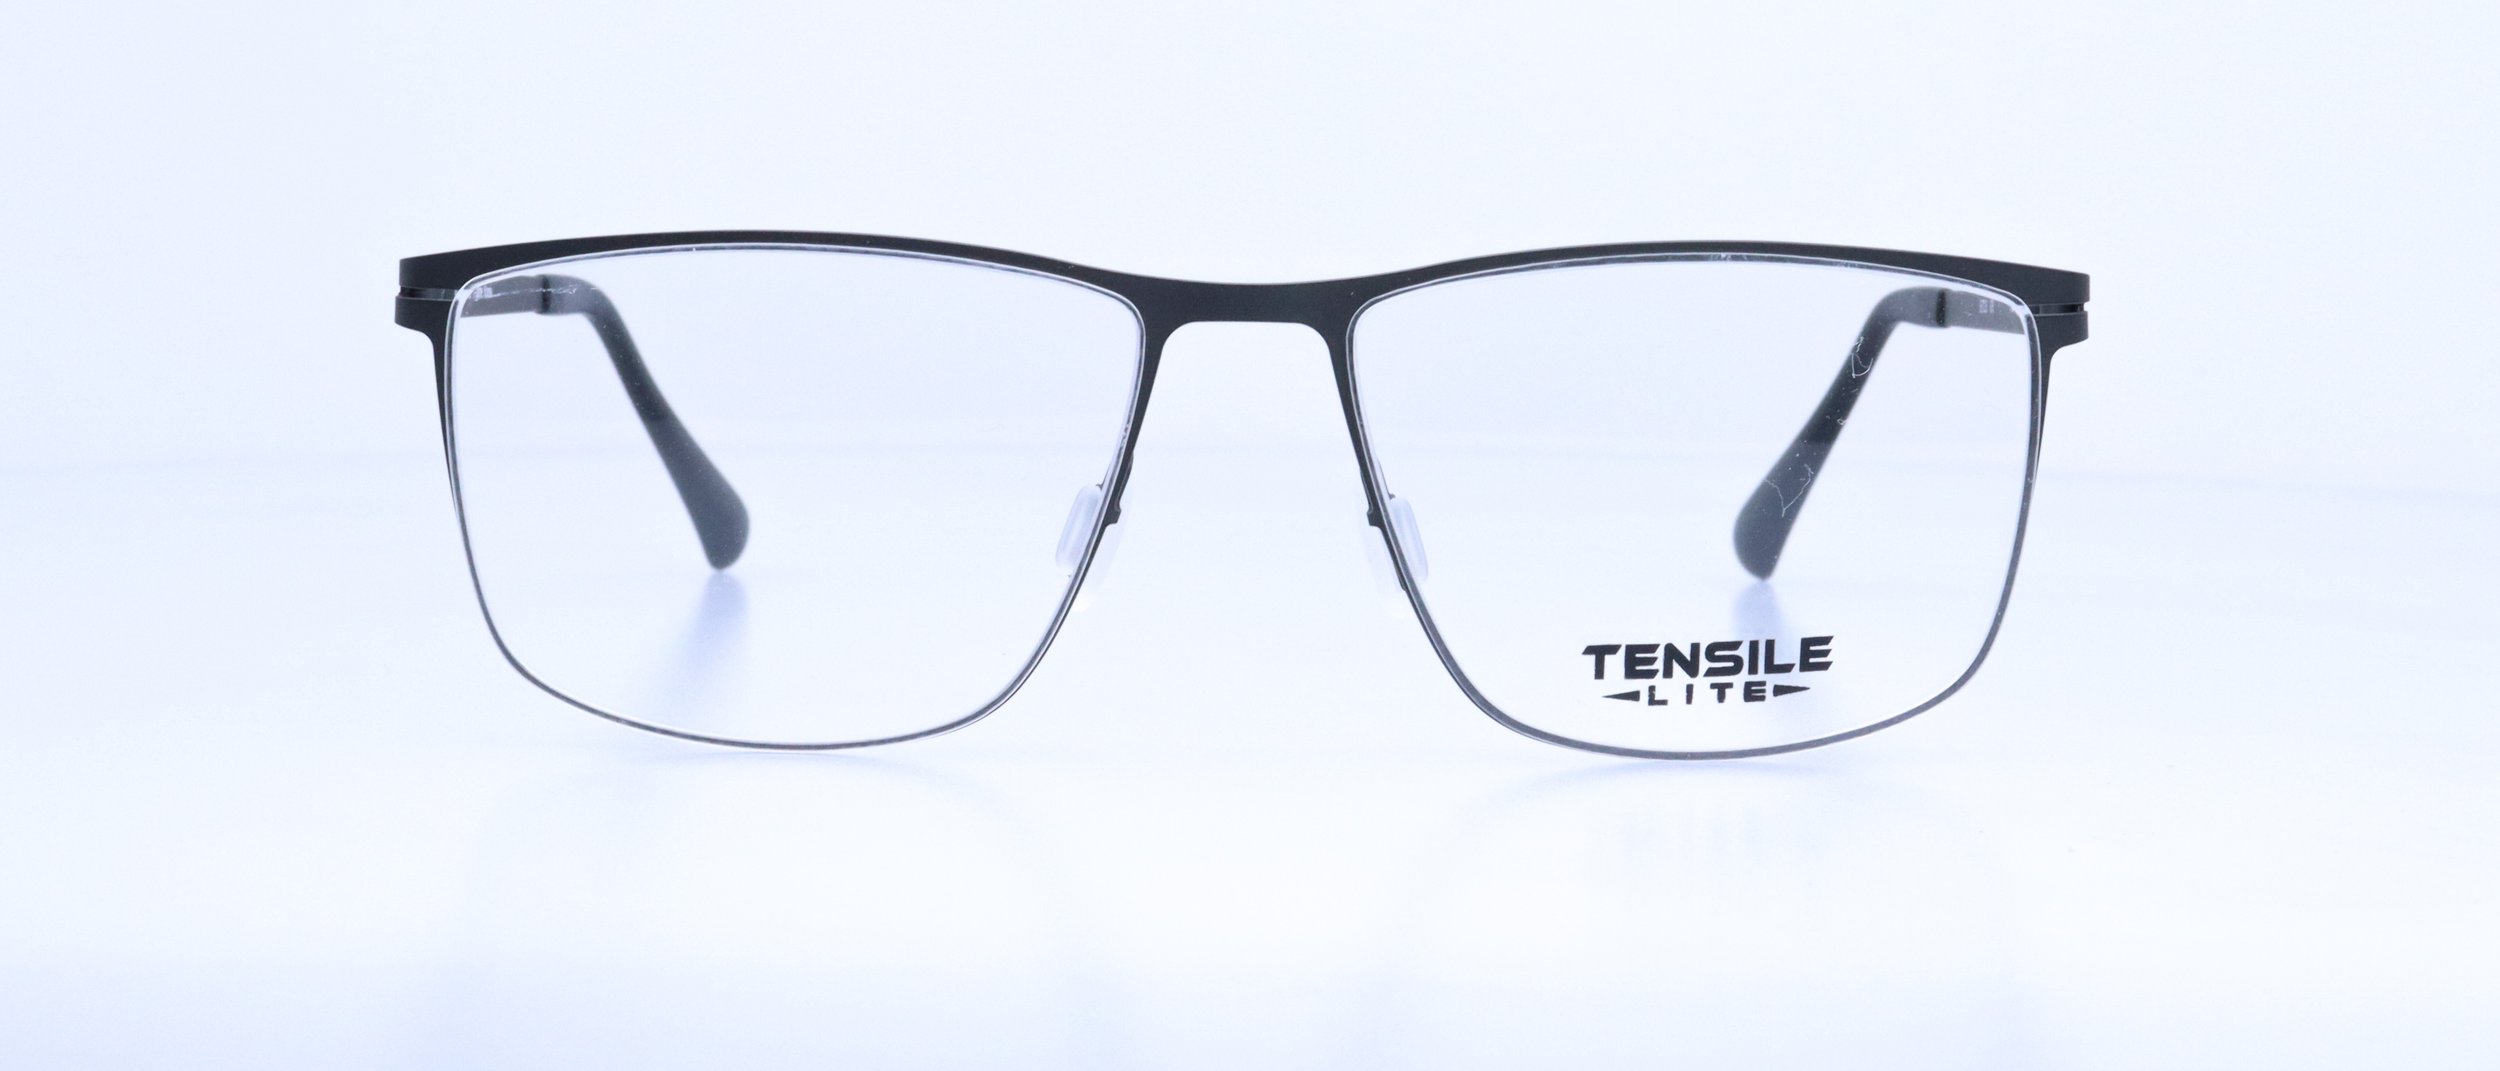  NEW!!! TL715: 56-16-145, Available in Black or Gunmetal 